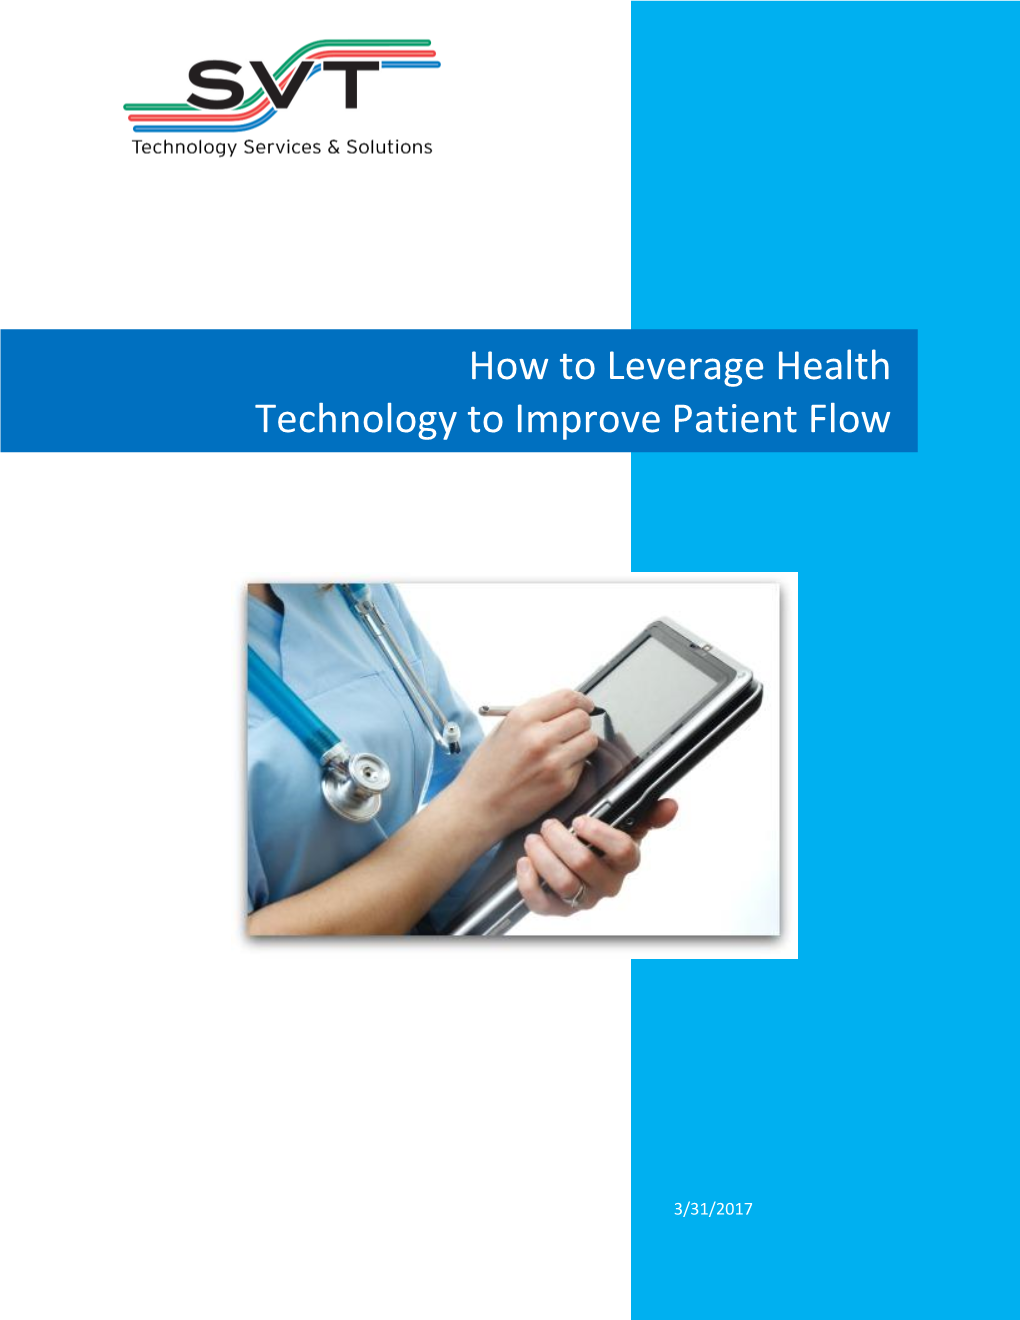 How to Leverage Health Technology to Improve Patient Flow